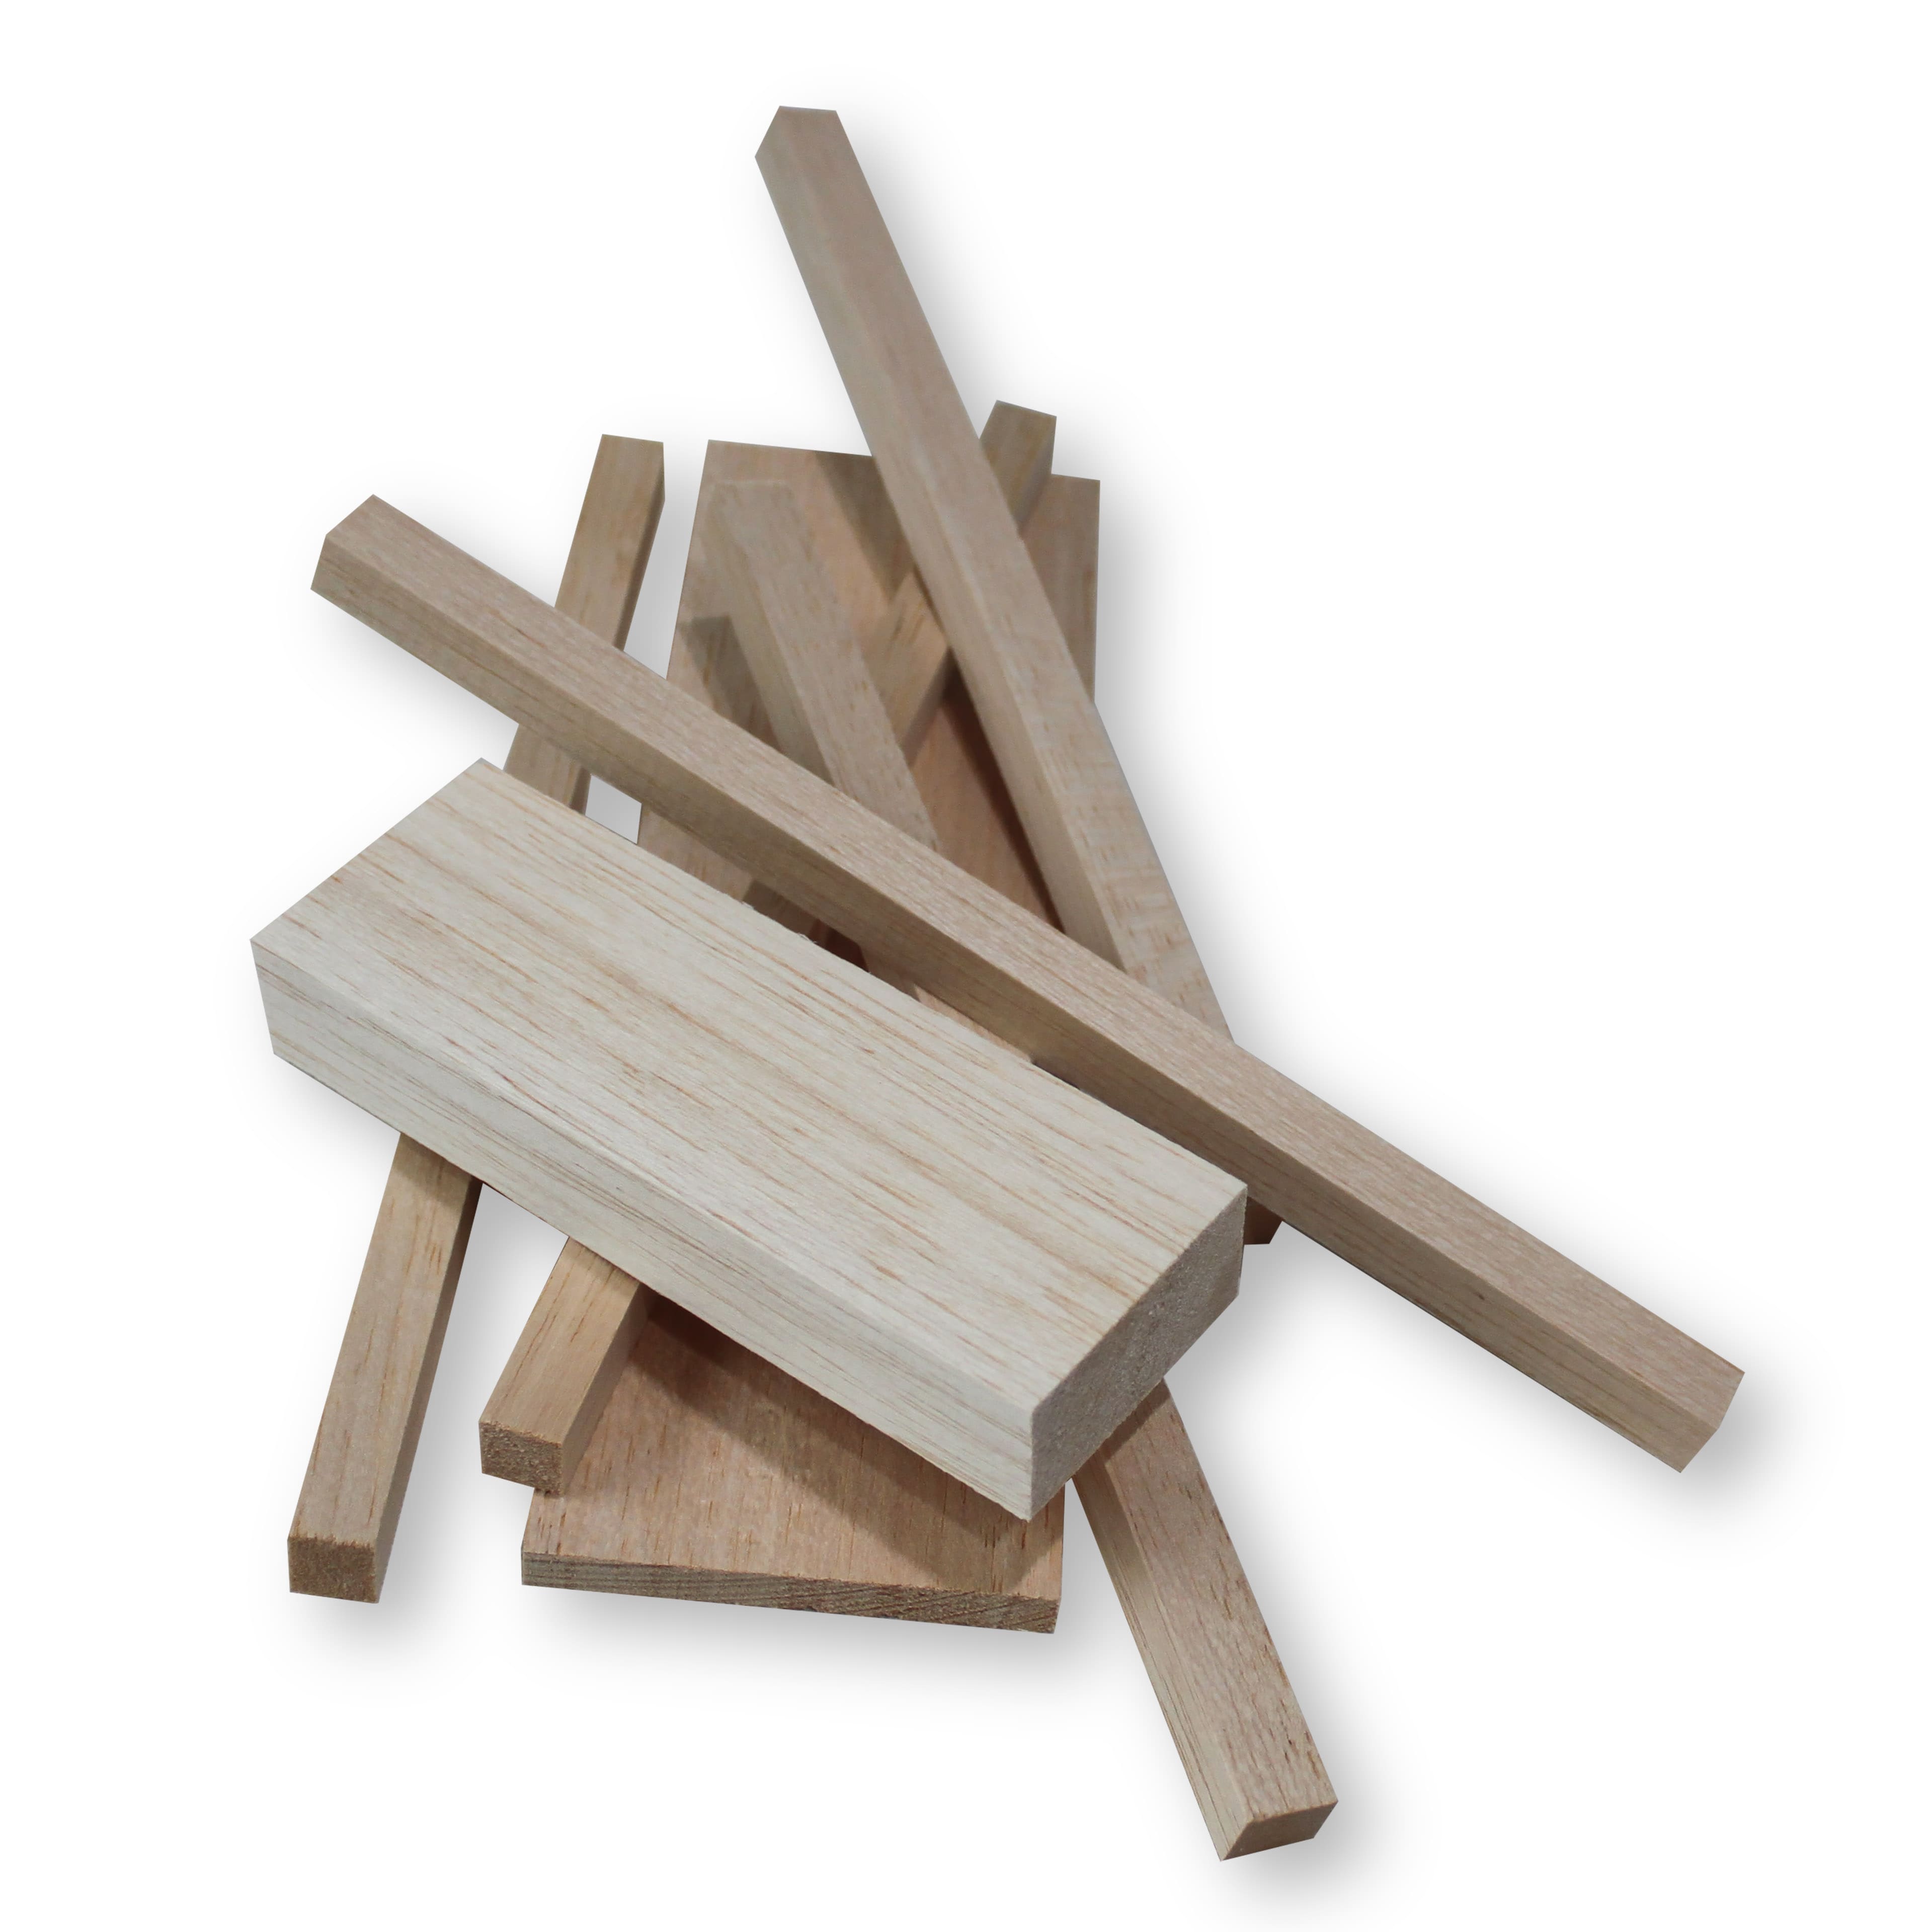 Balsa Wood Indiana Craft Wooden Pieces for sale